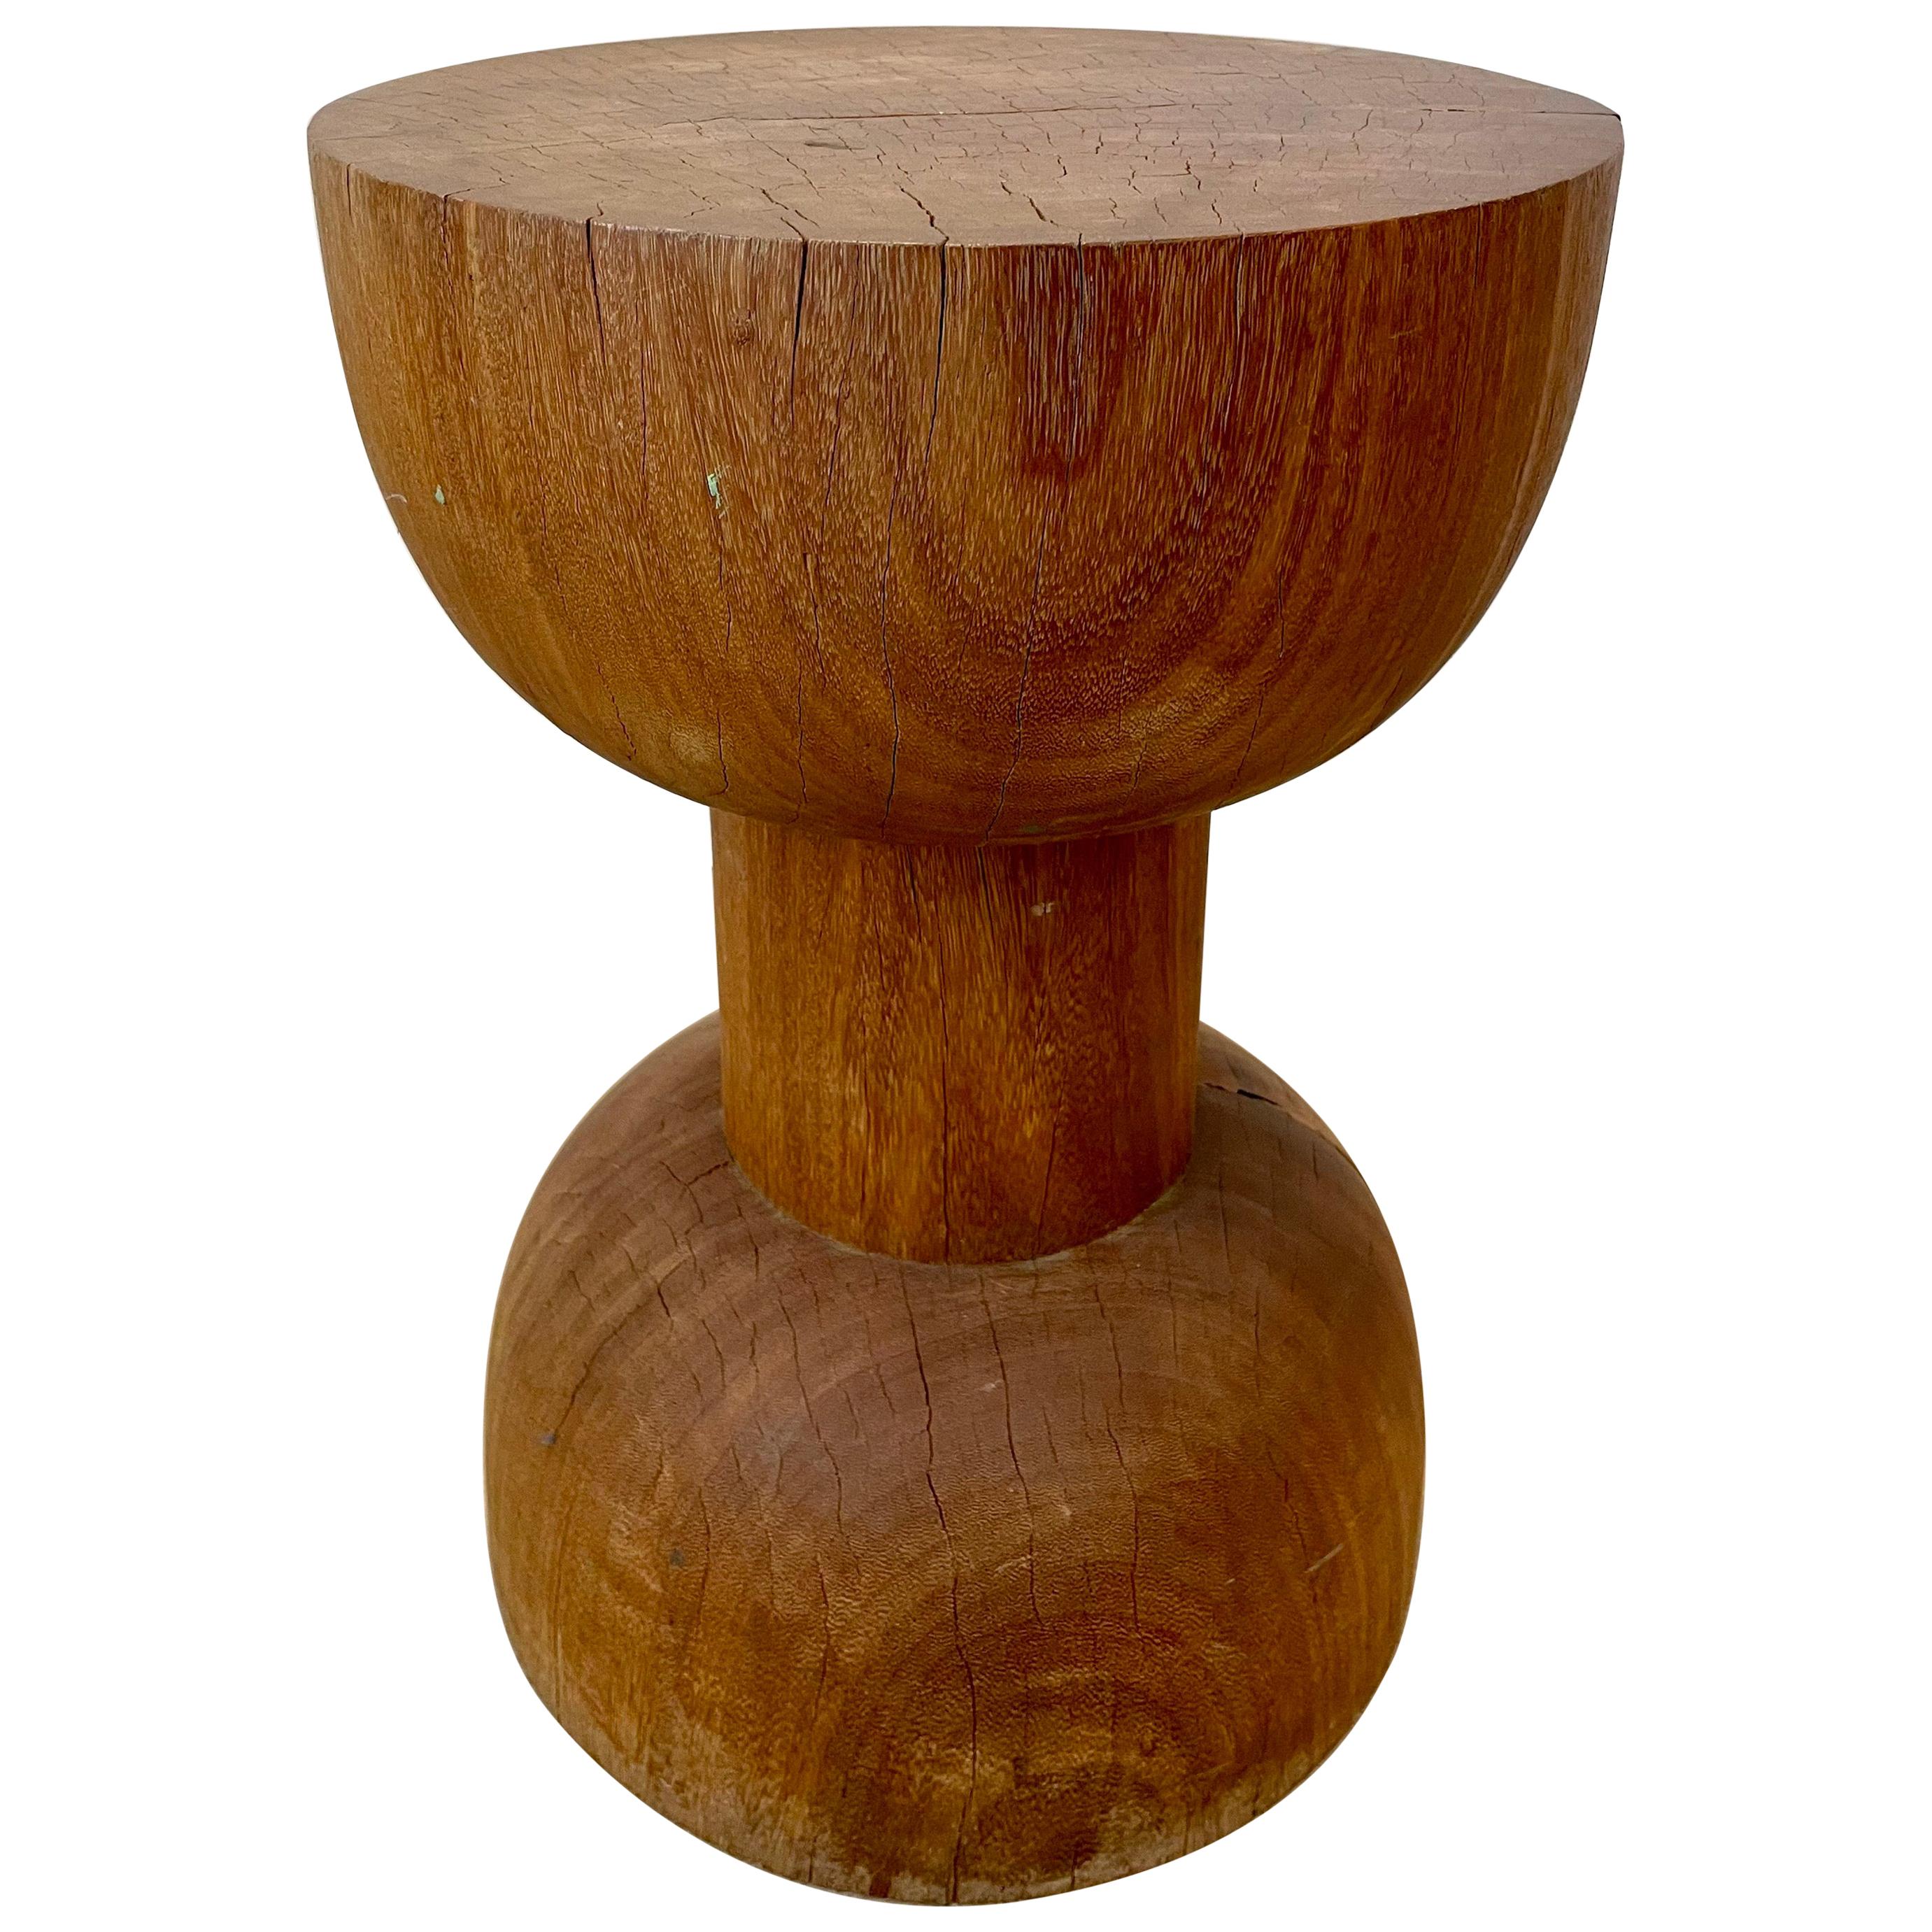 Sculptural Brazilian Side Table or Stool in Hardwood "One"